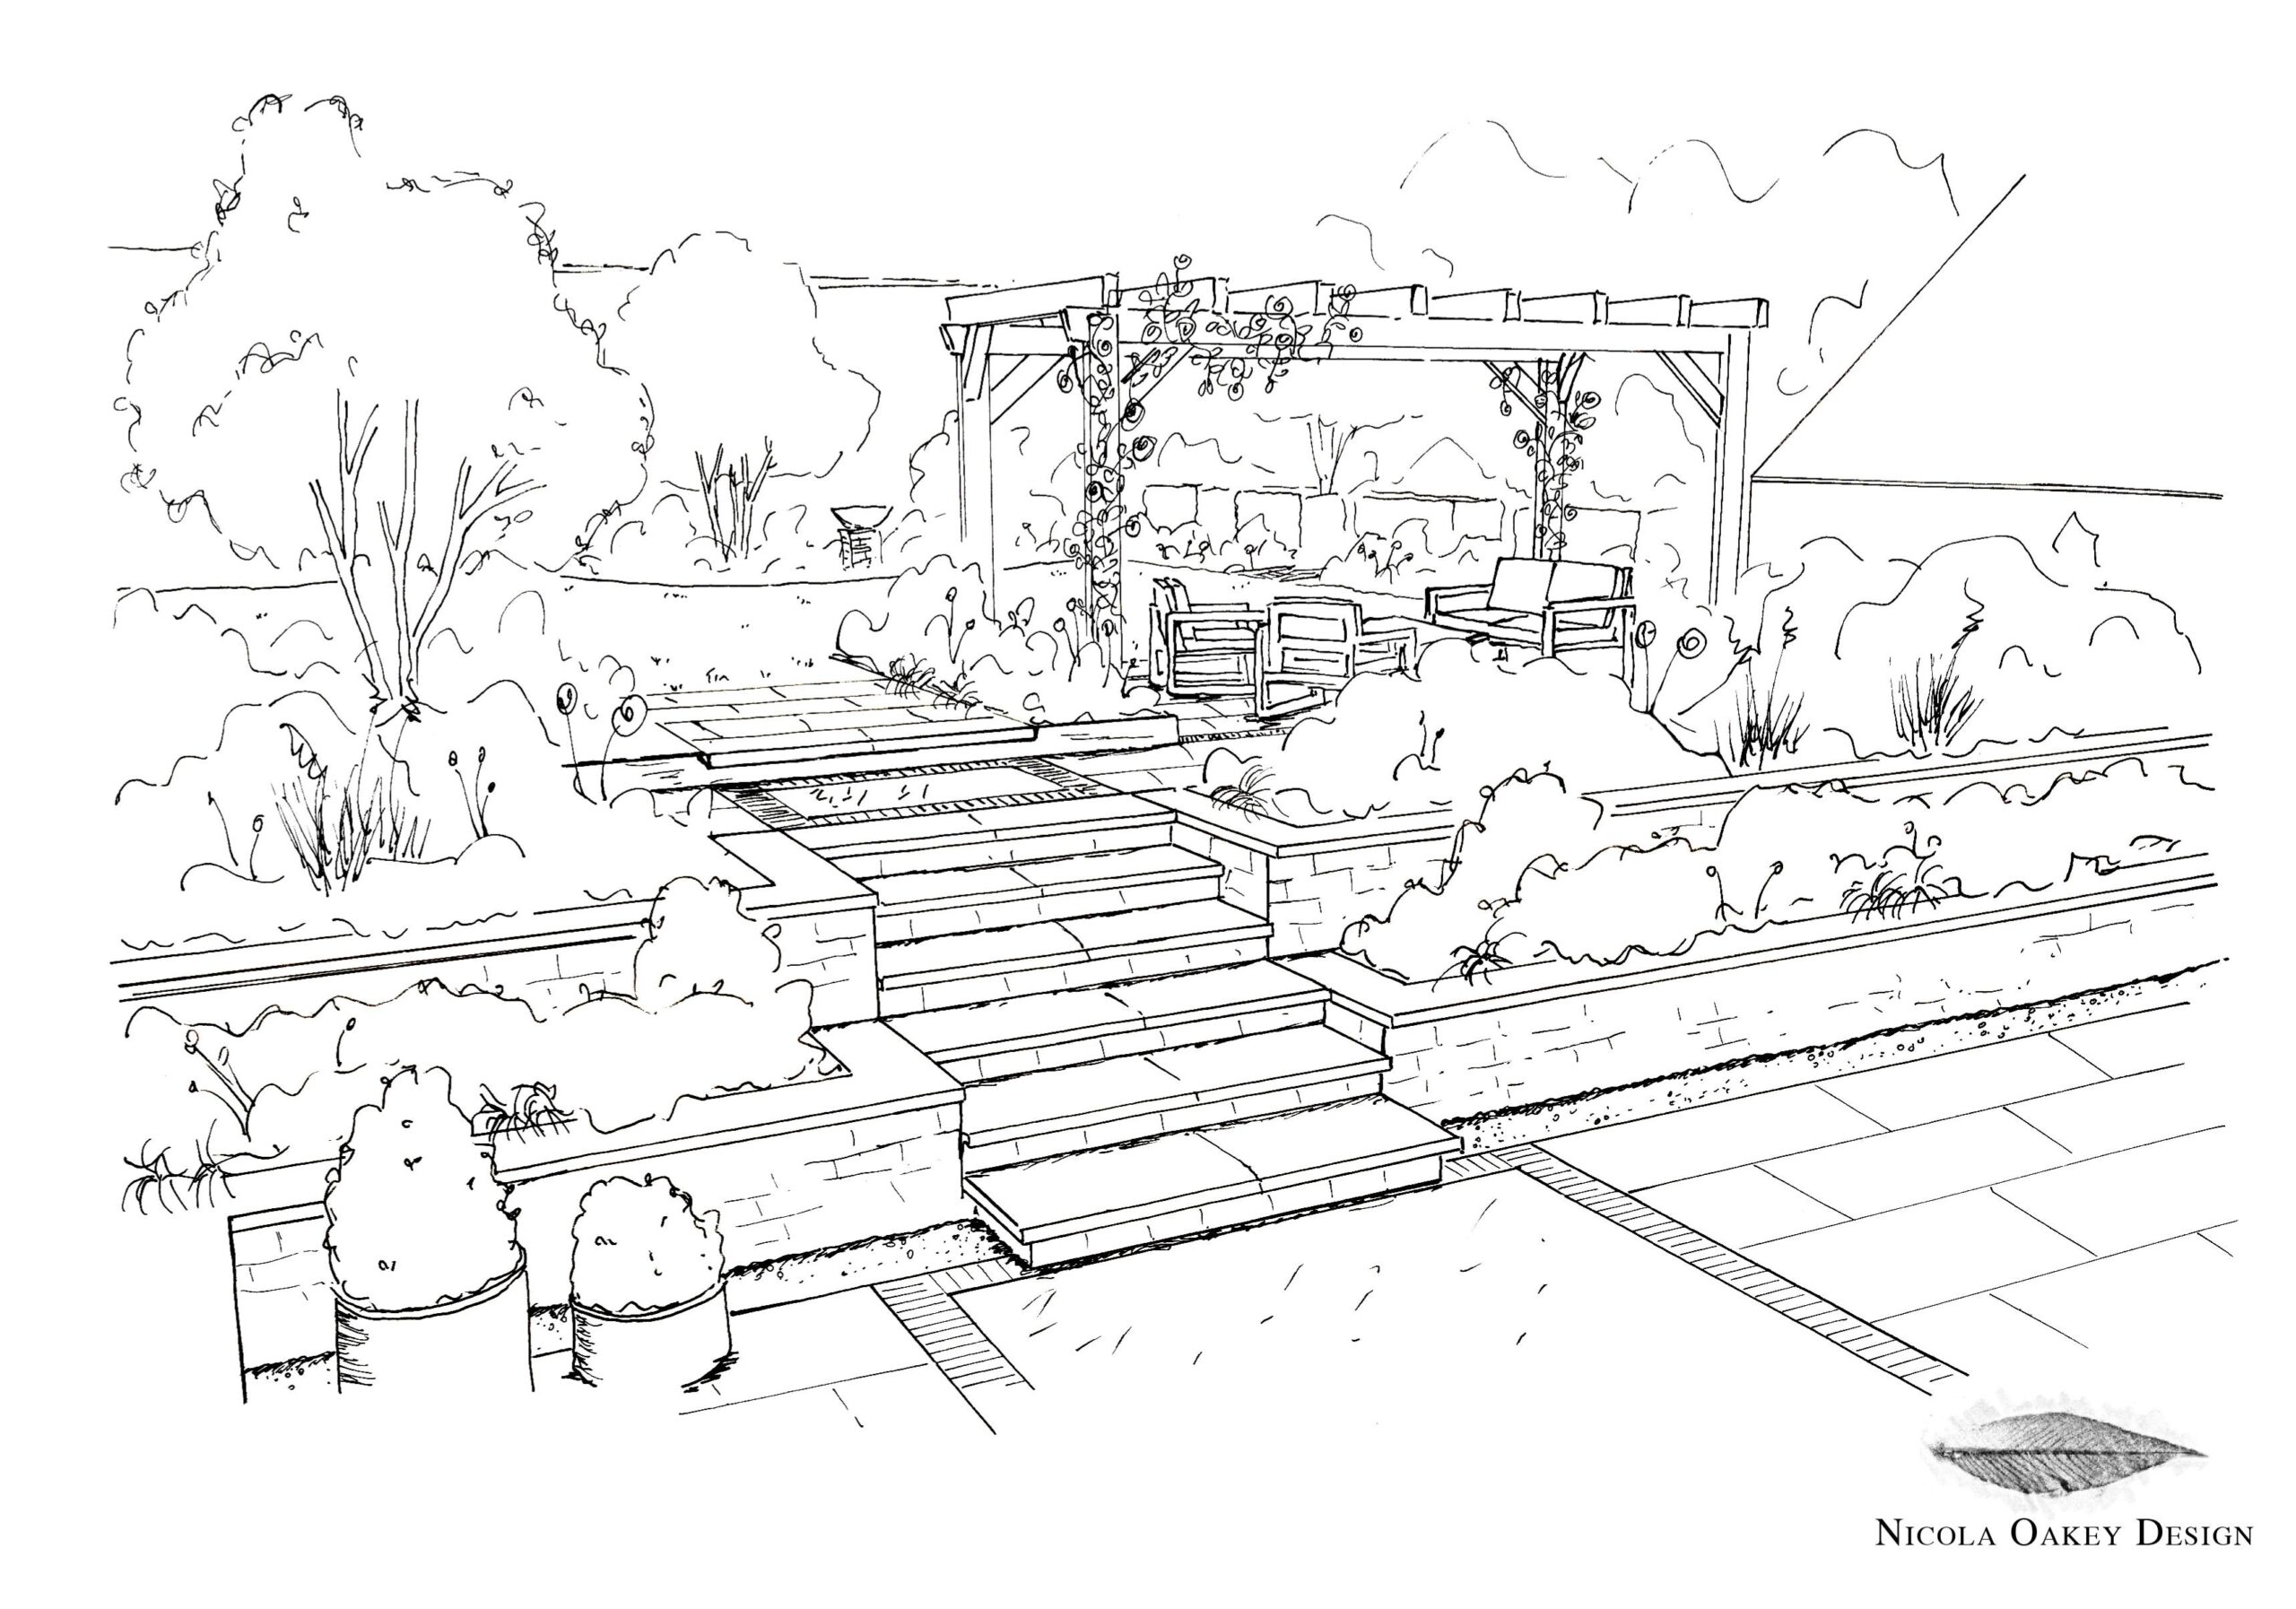 Finedon Perspective Sketch